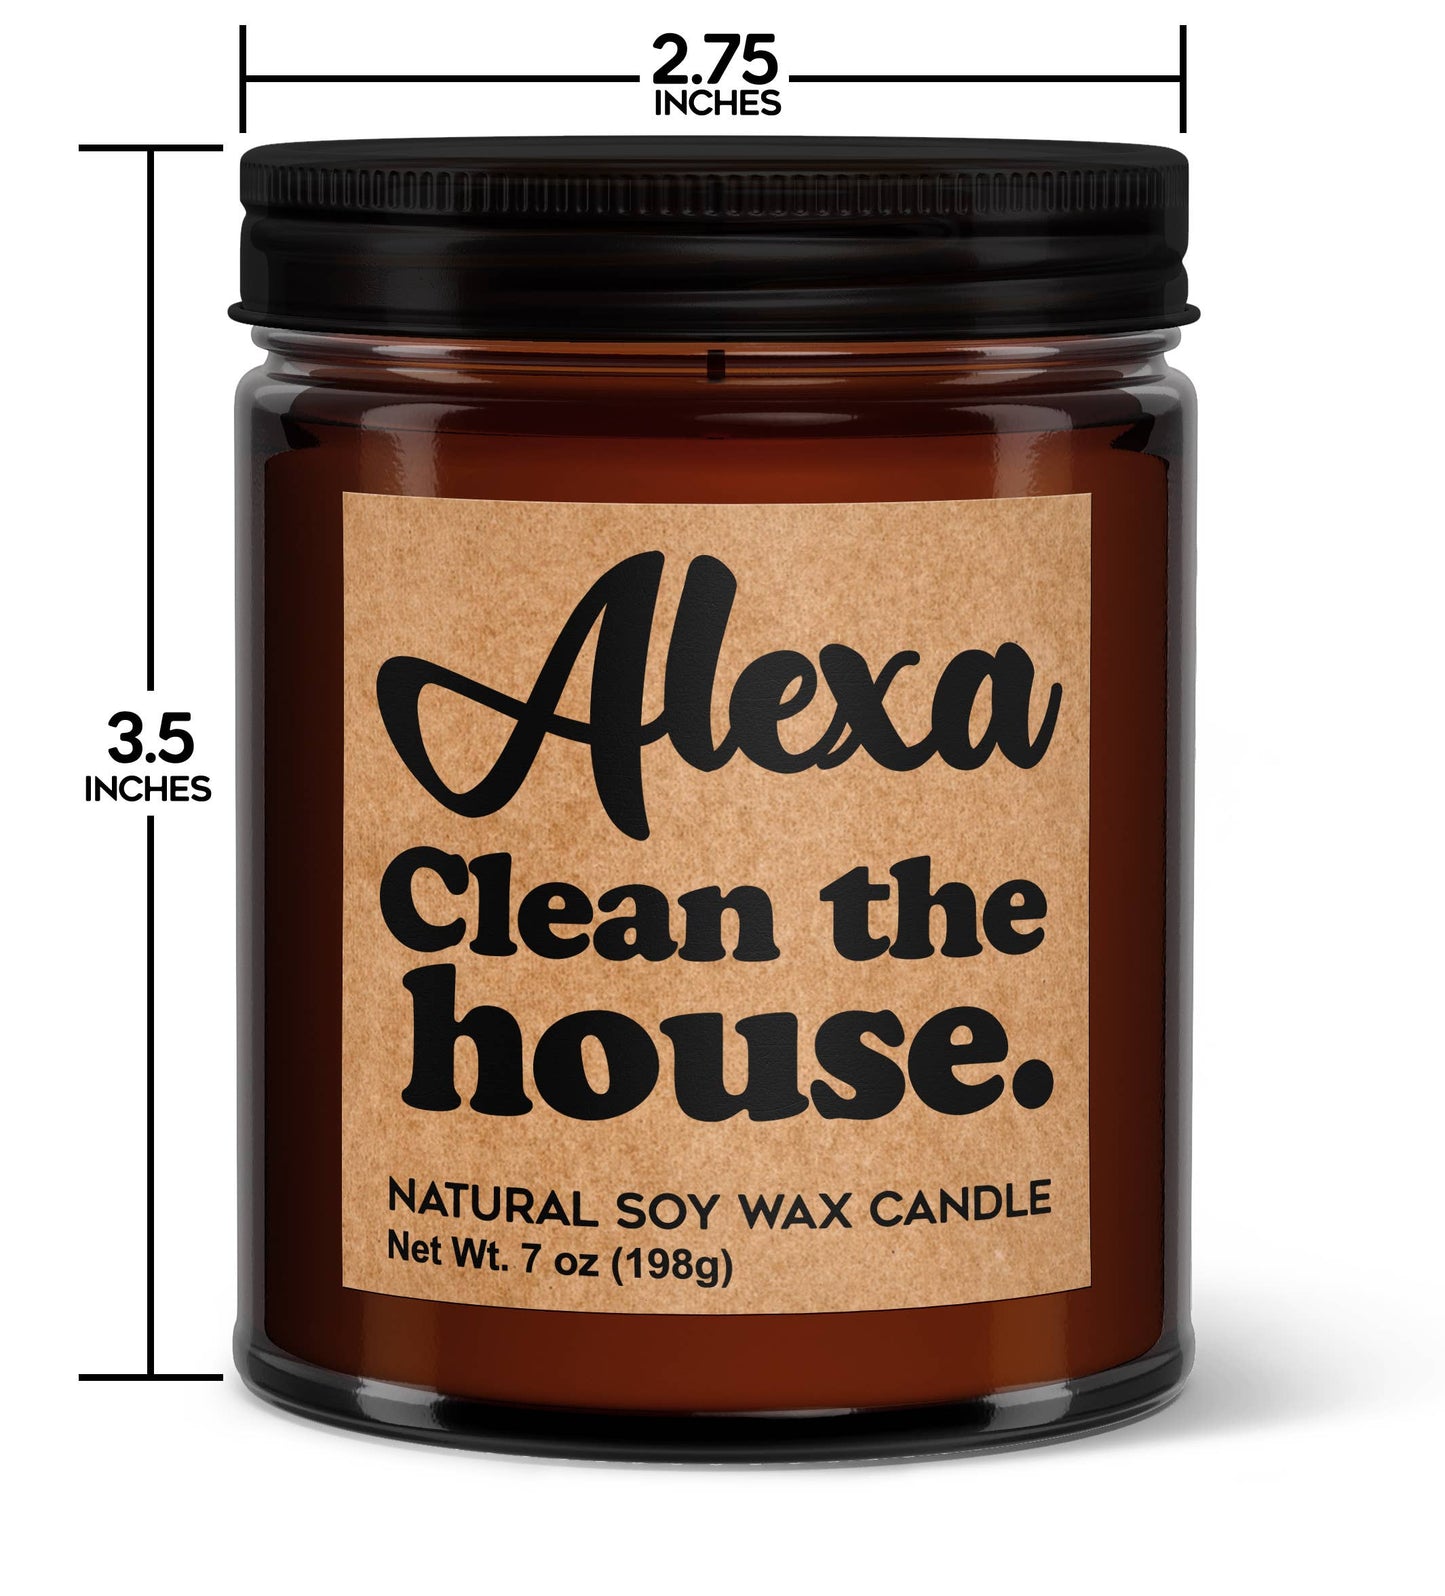 Alexa Clean the House Soy Candle - Votive Soy Candle-1